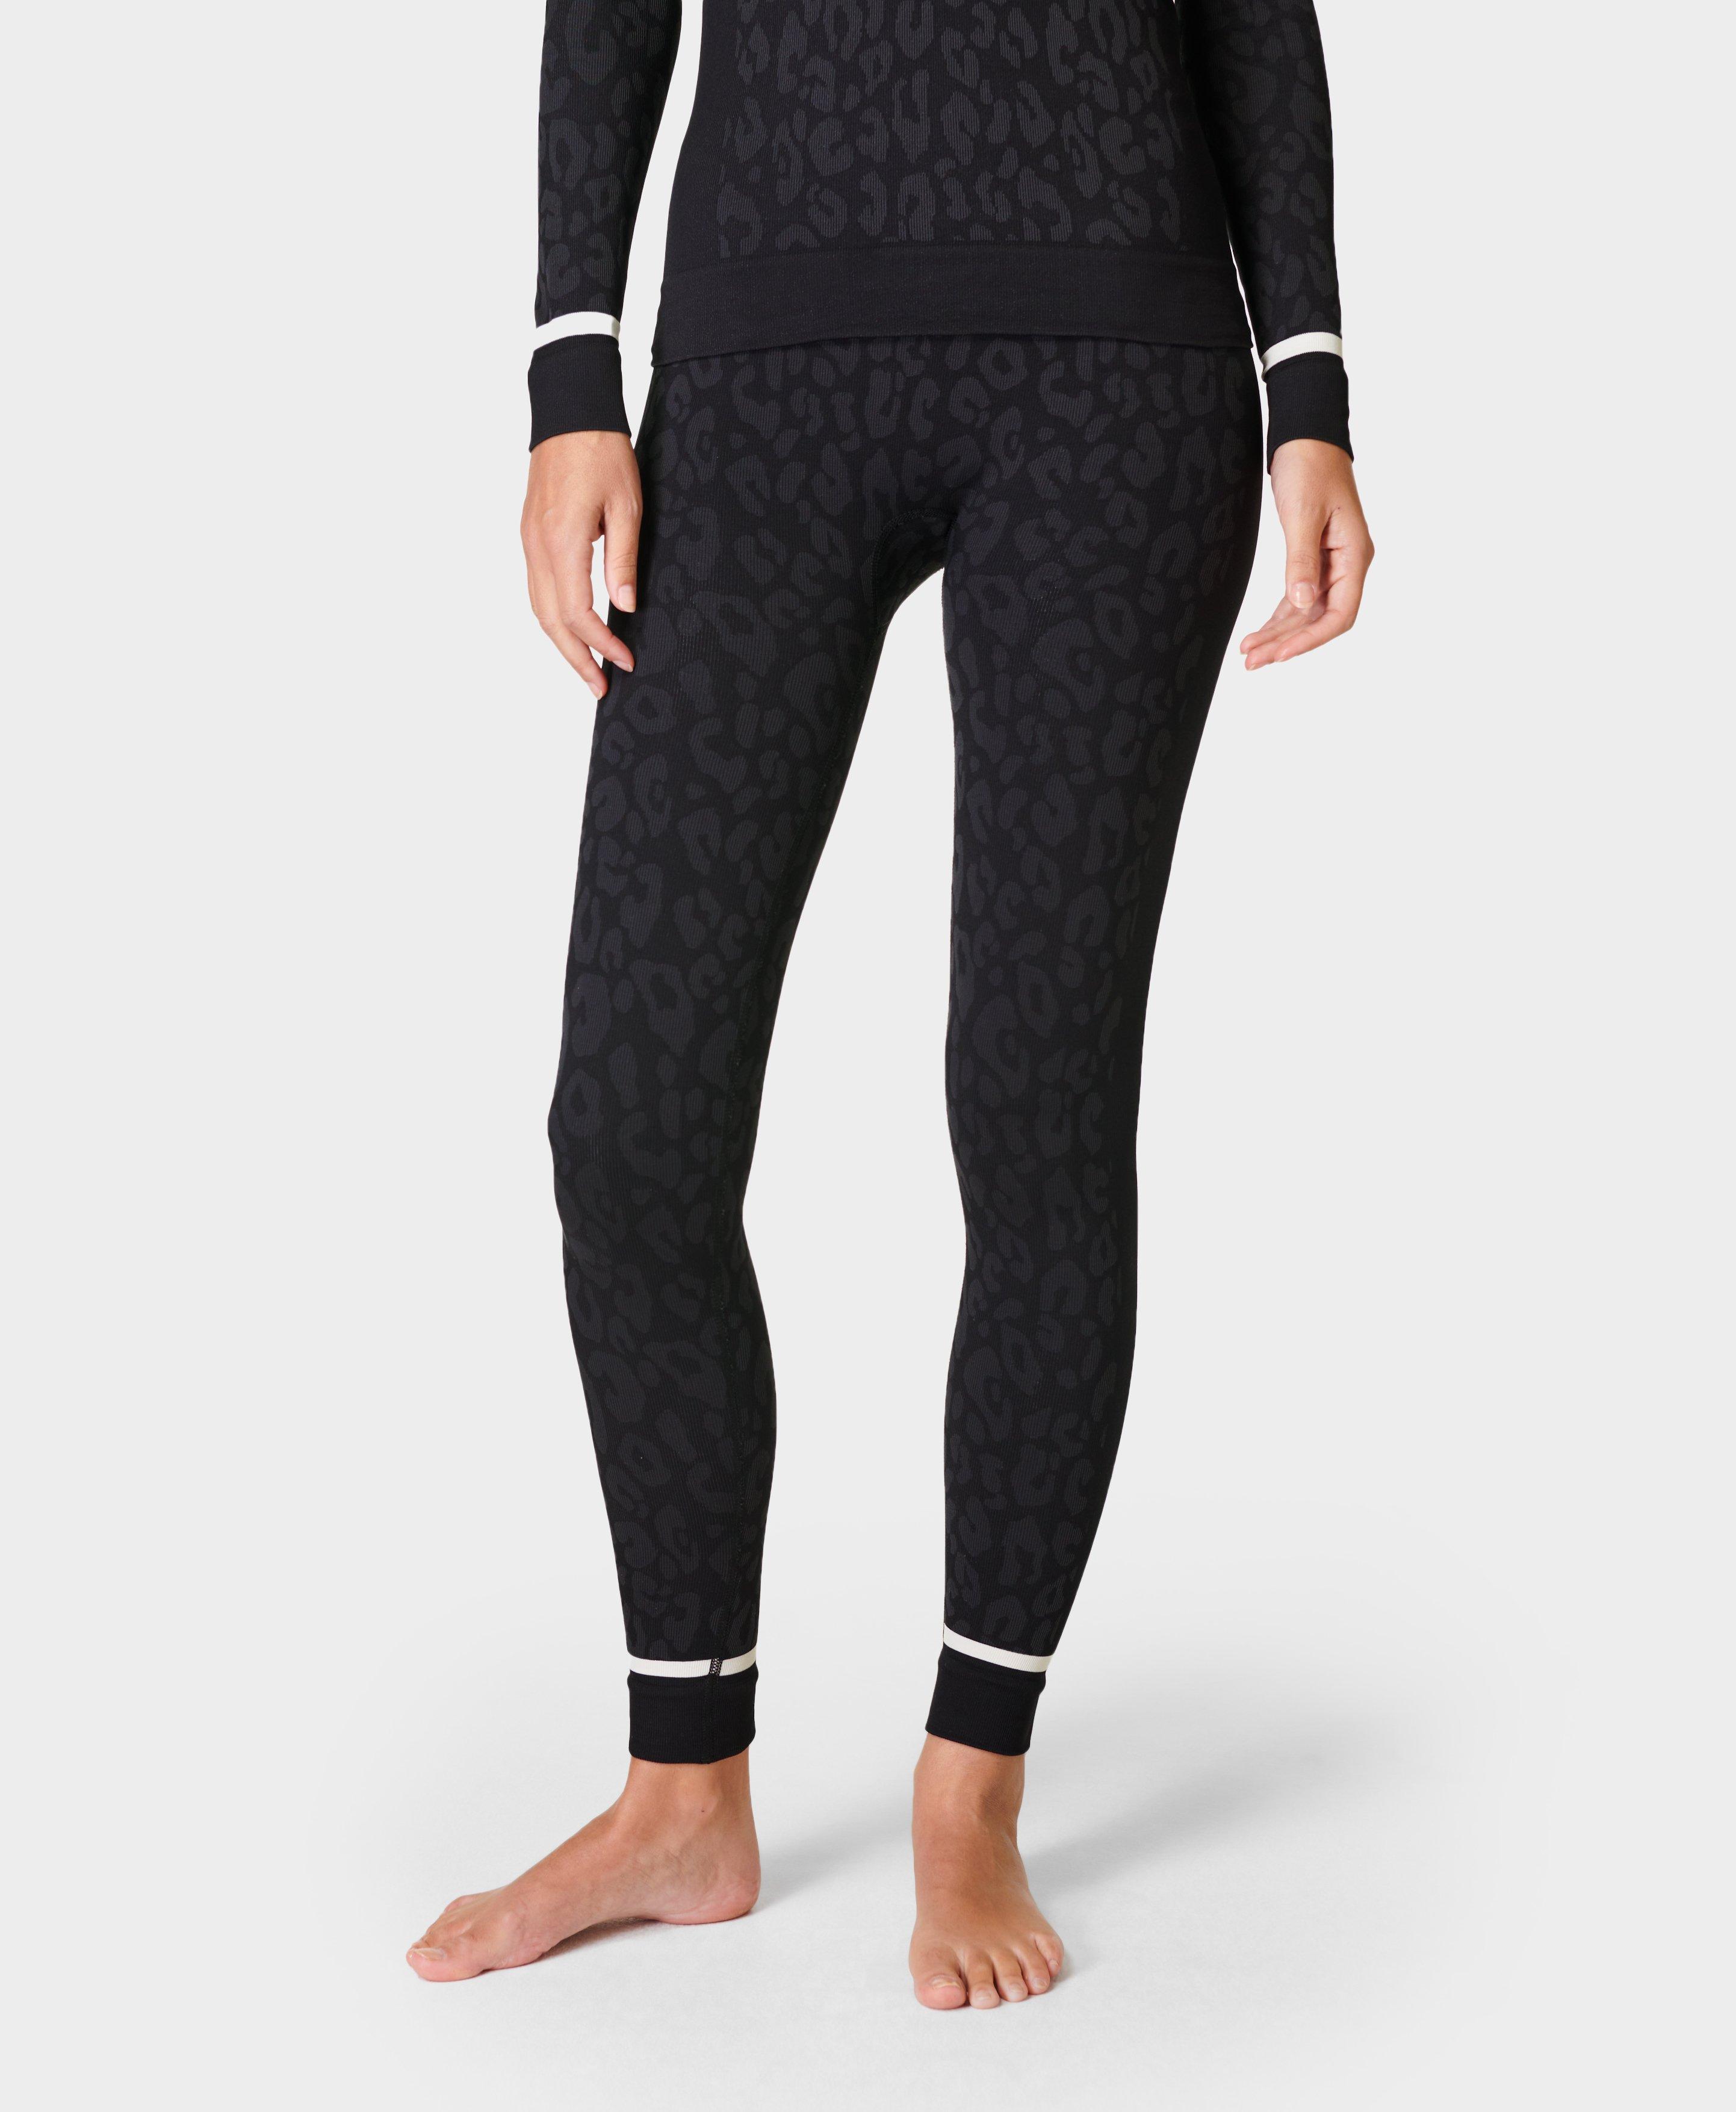 Women's Leggings Chill Chasers Collection (Two Layer Wool Blend)